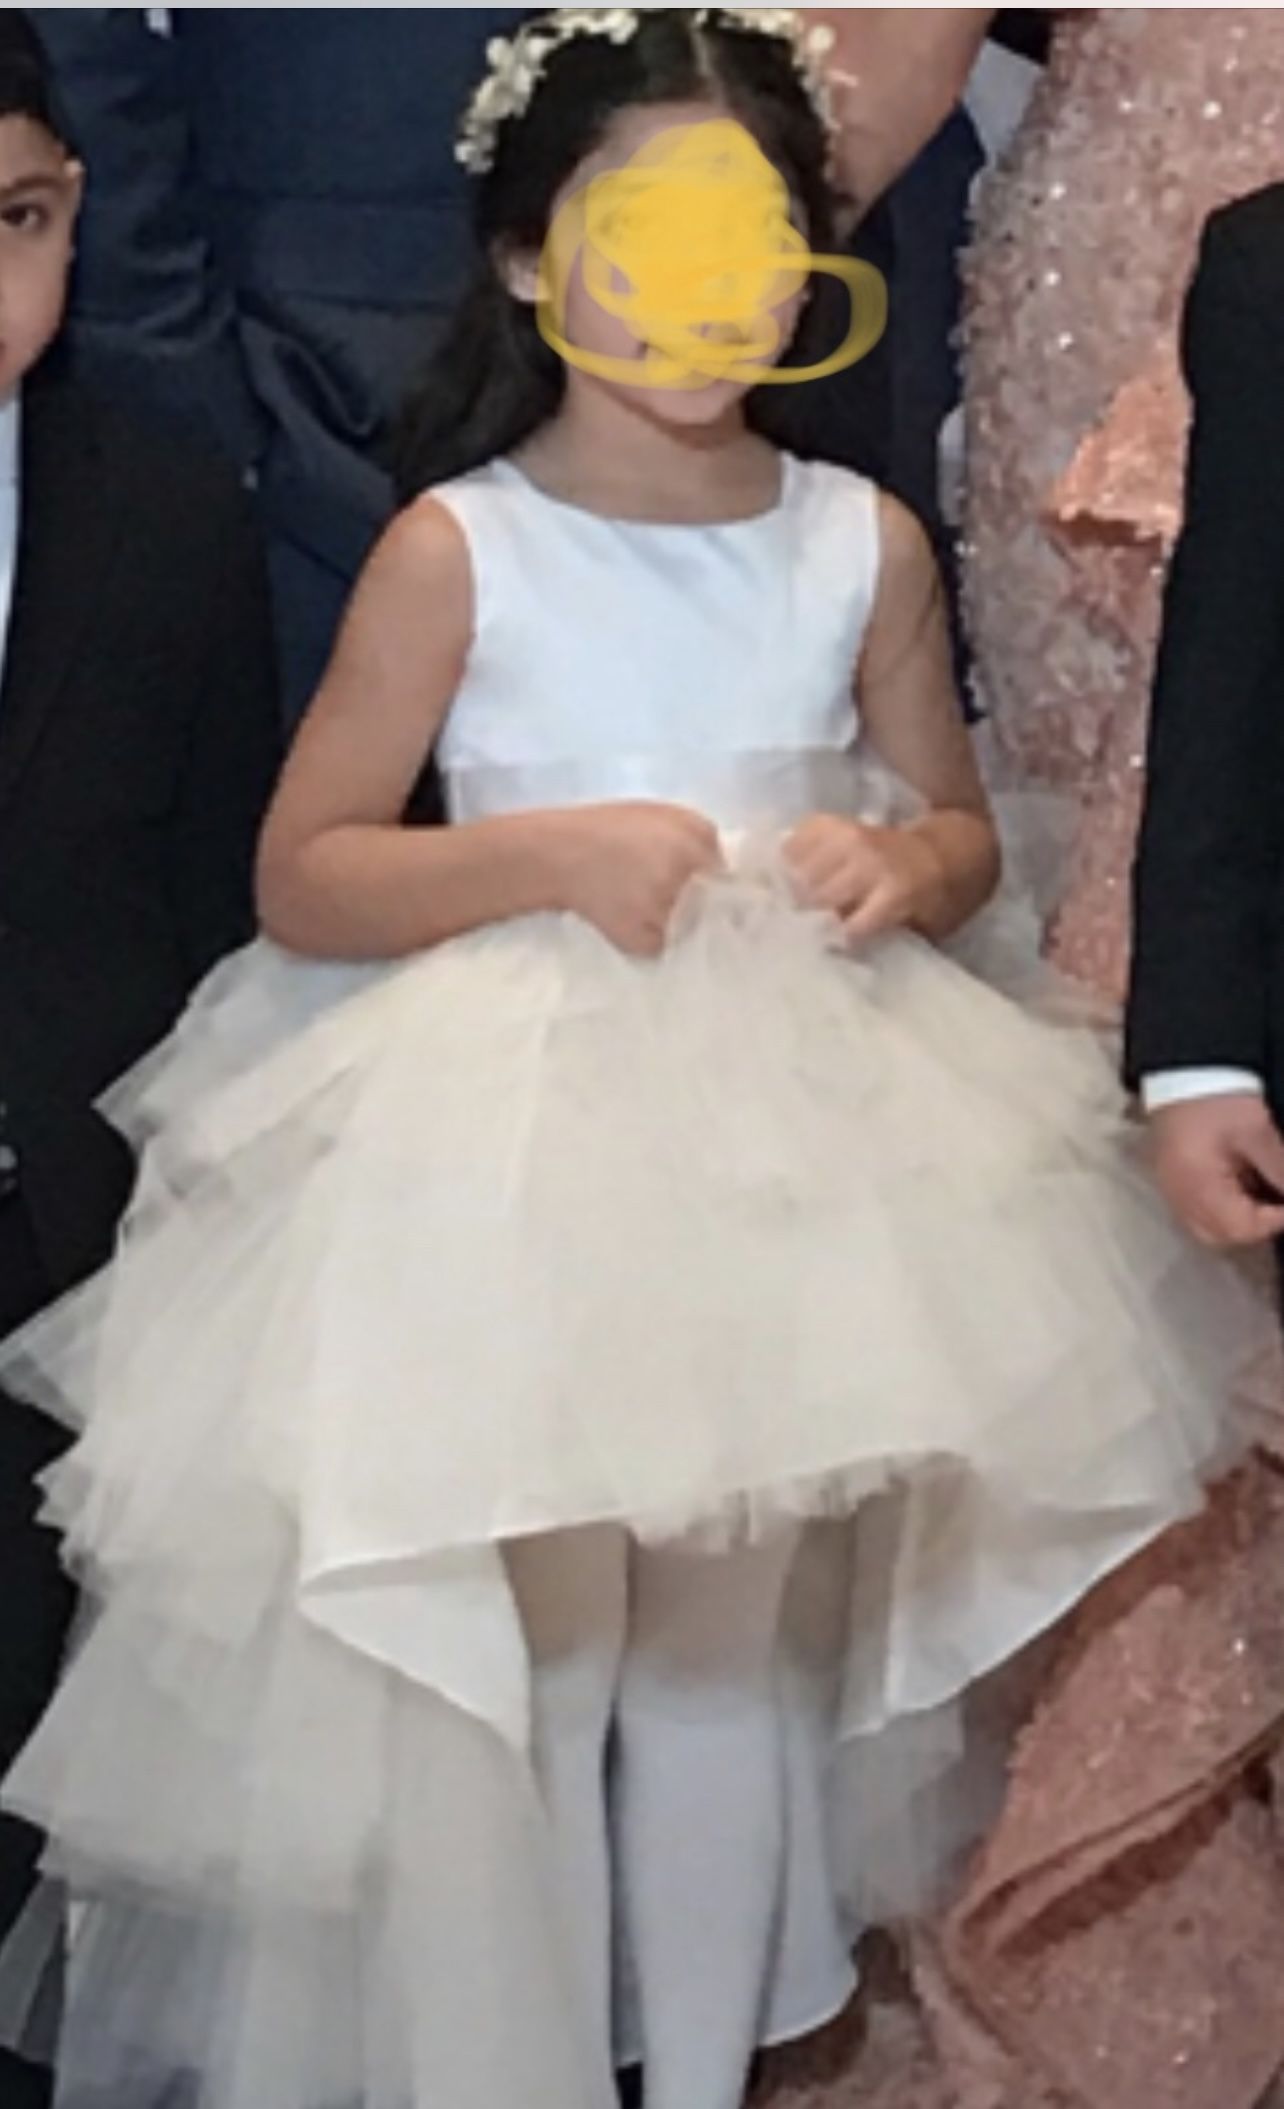  A Beautiful Flower Girl Dress Worn a couple hours only 